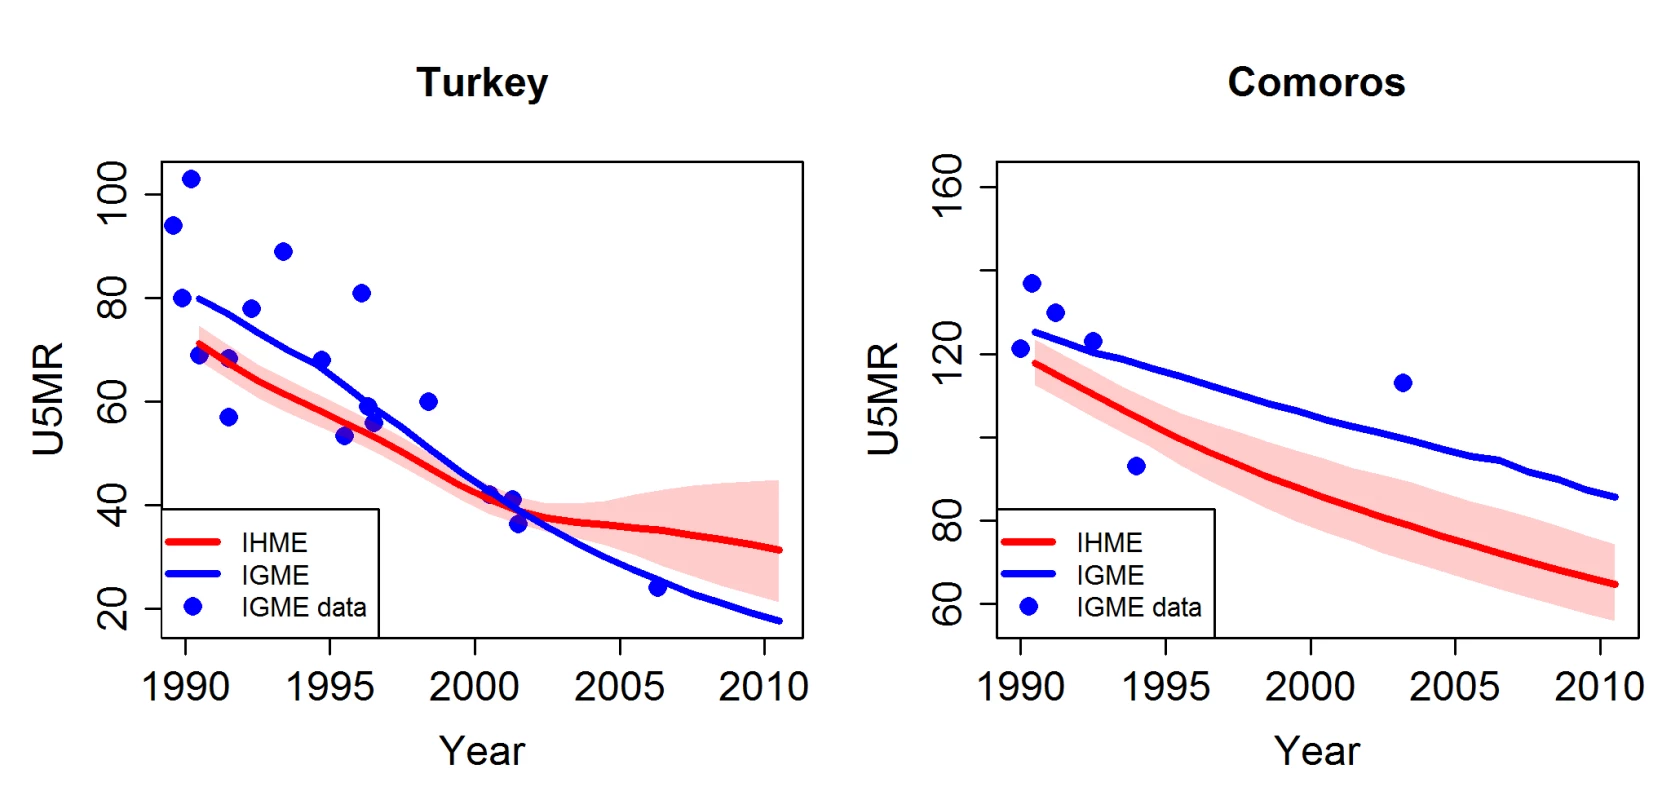 Comparison of U5MR estimates from 1990 to 2010 for examples of countries with different completeness of the databases used by the UN IGME and the IHME.